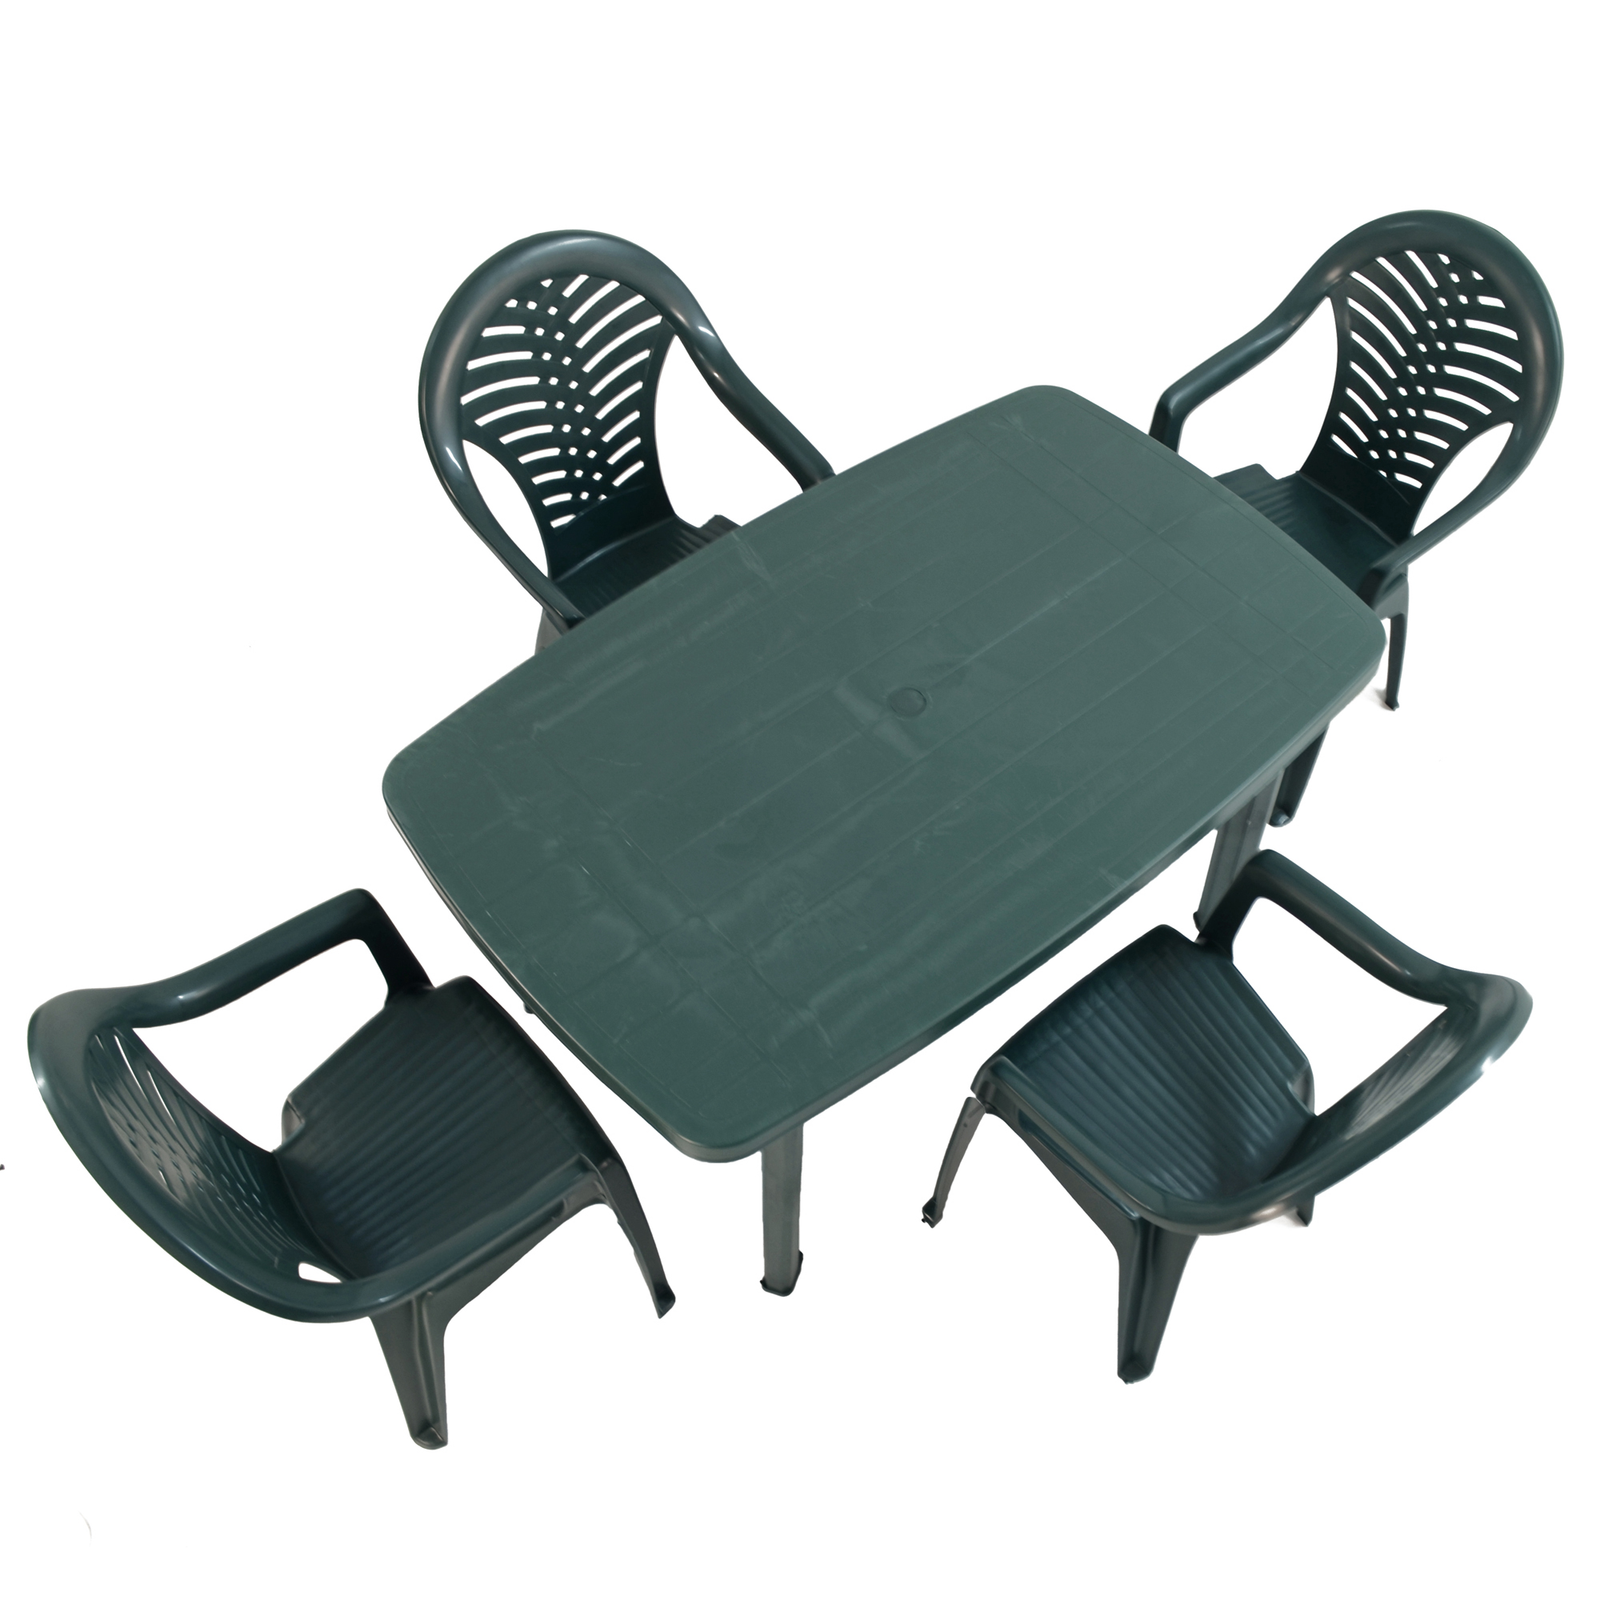 Trabella Rimini Rectangular Table With 4 Pineto Chairs Set Green Dining Sets Trabella Default Title  